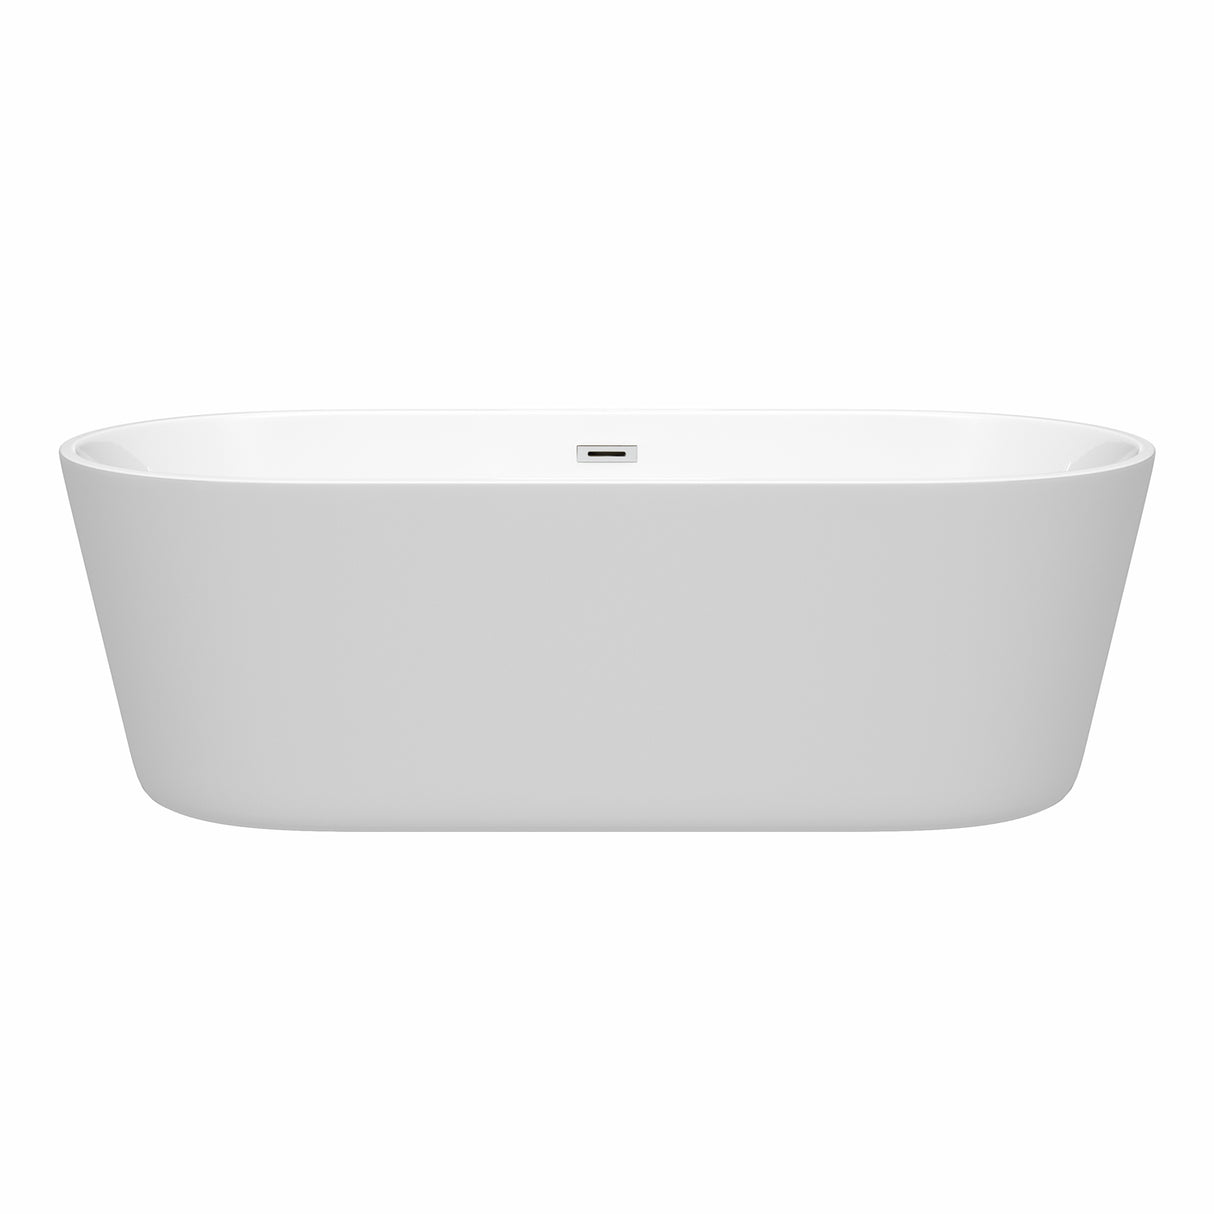 Carissa 71 Inch Freestanding Bathtub in White with Polished Chrome Drain and Overflow Trim